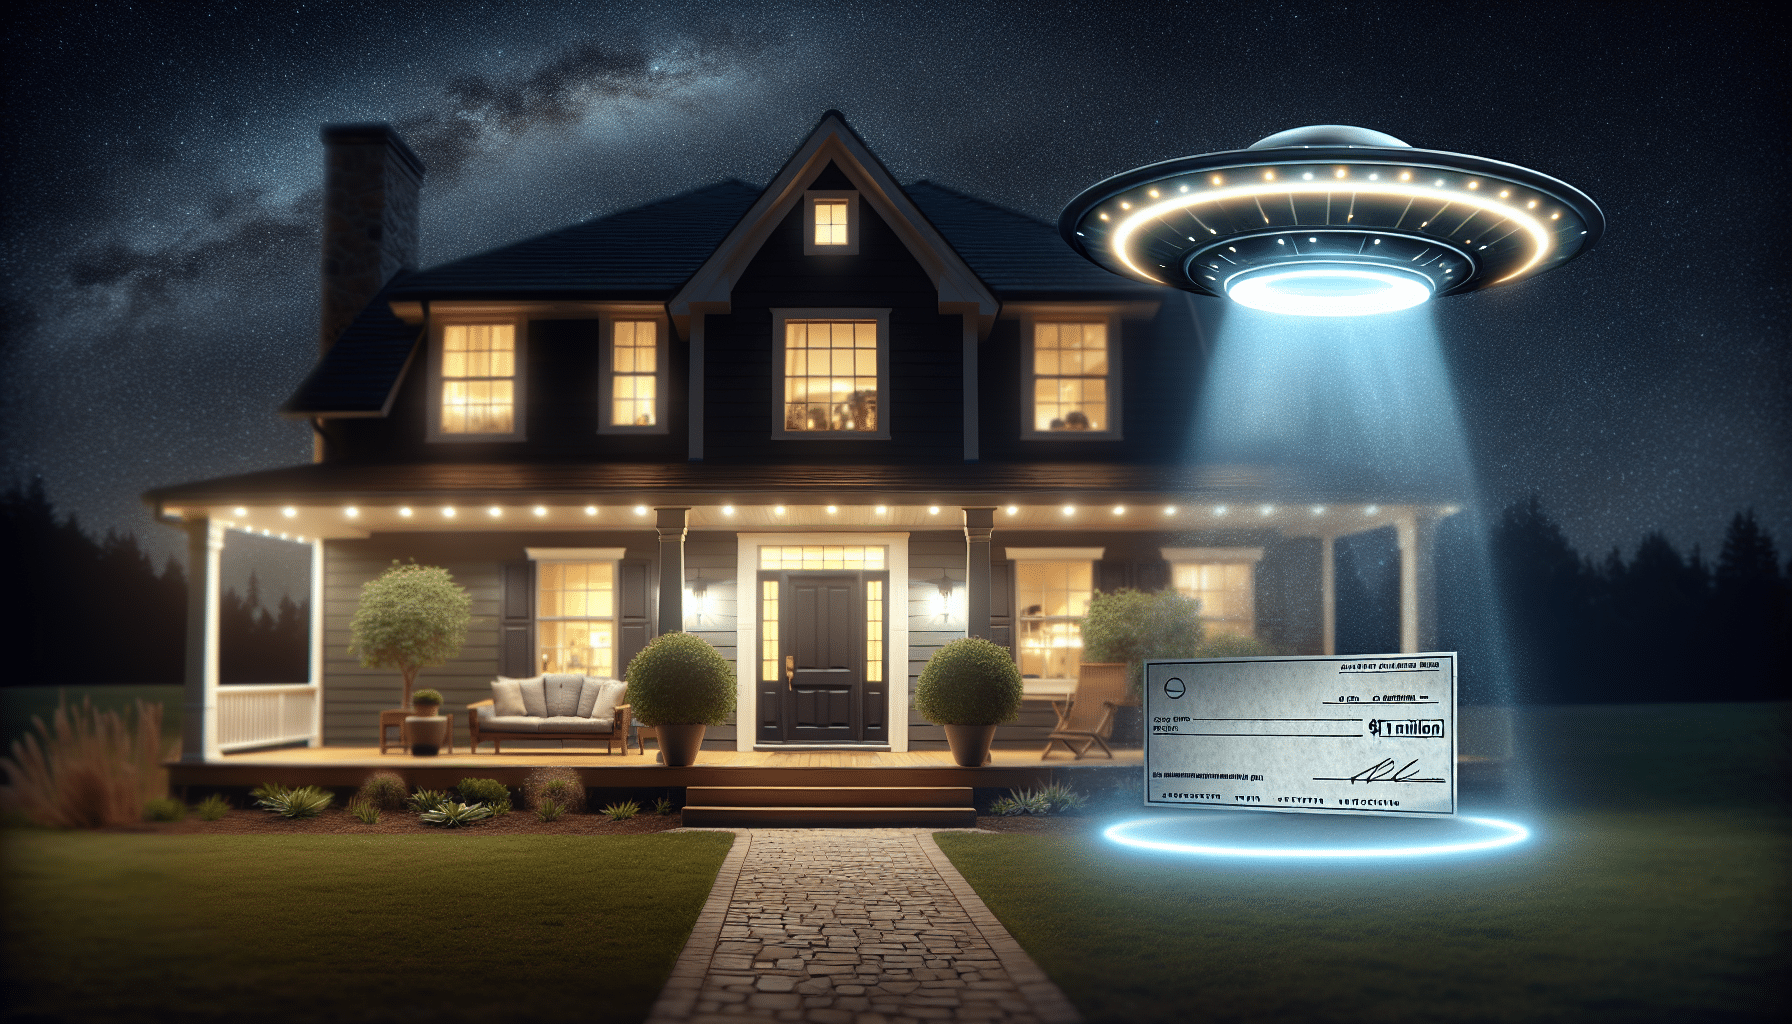 Catch an Alien and Win $1 Million with Your Ring Camera